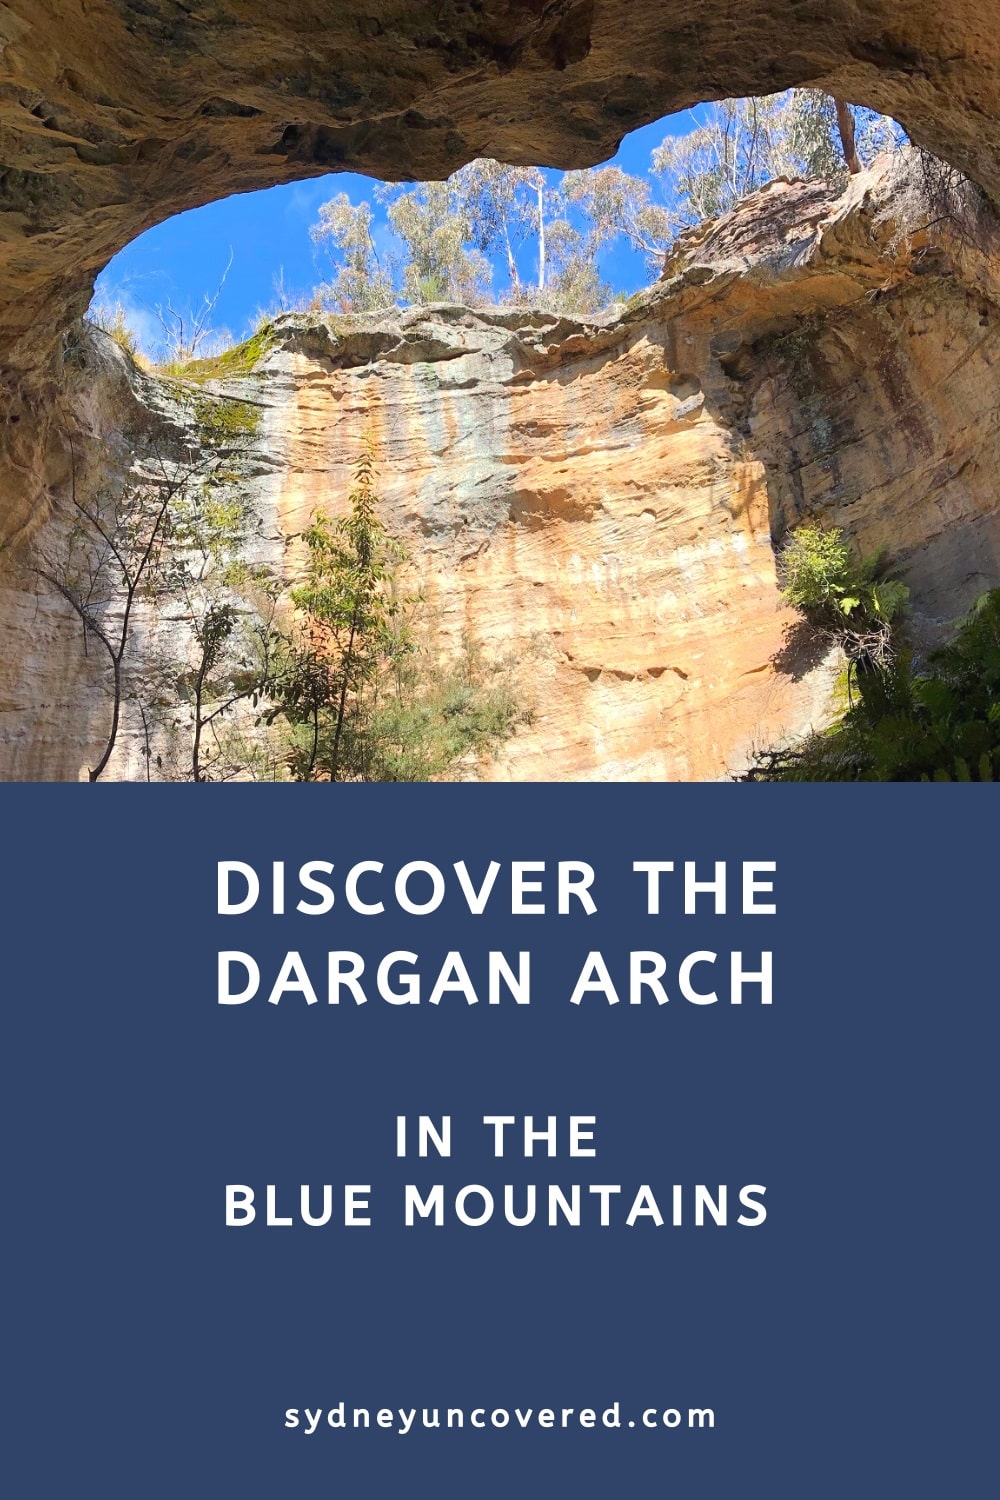 Dargan Arch in the Blue Mountains